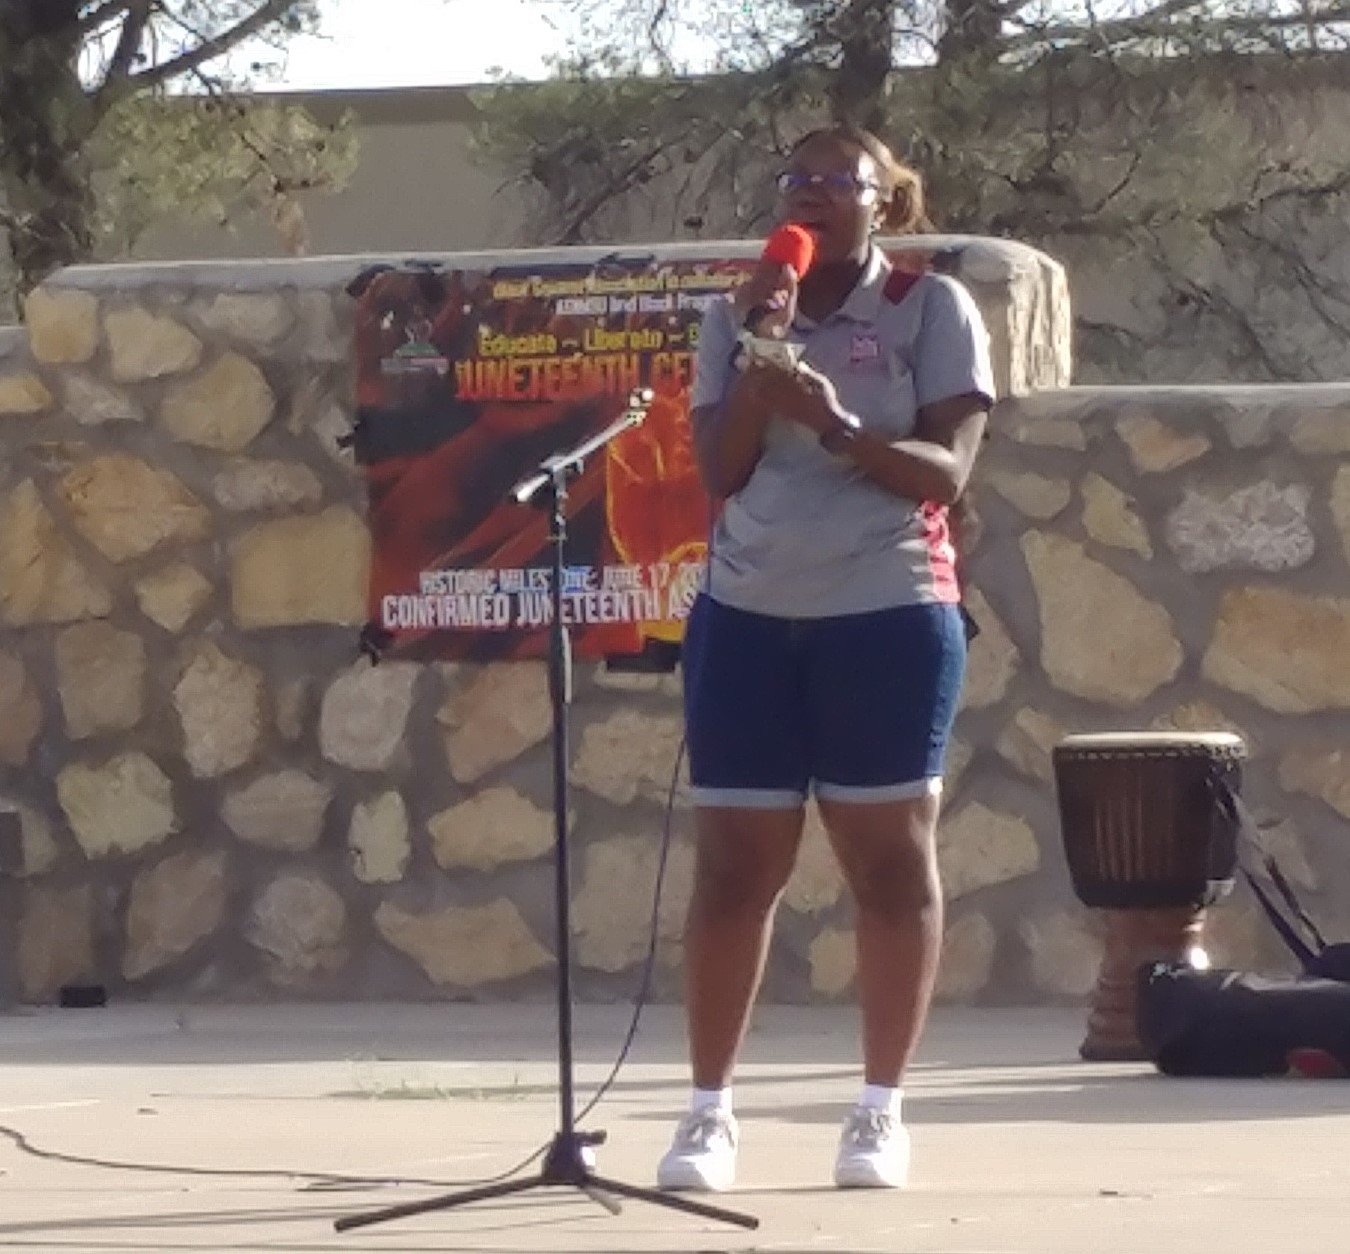 NMSU alumna Hunter Stewart singing “Lift Every Voice and Sing” at the June 17 Juneteenth celebration at NMSU.